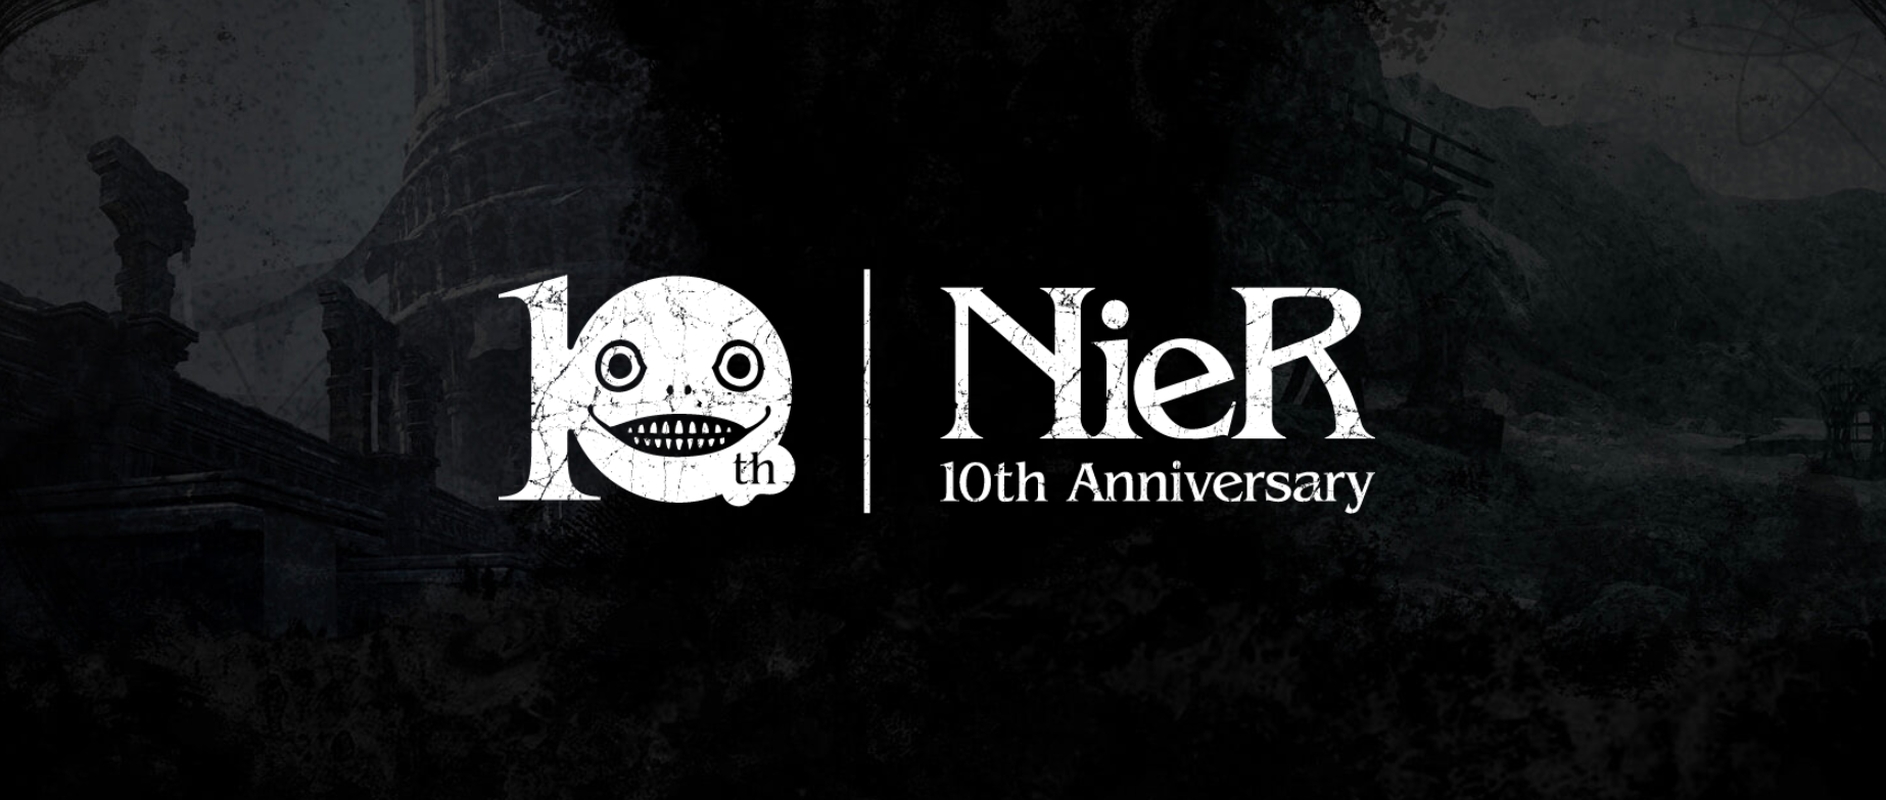 NieR: Replicant Will Receive Massive Upgrade For Its Anniversary On The PlayStation 4 And The Xbox One